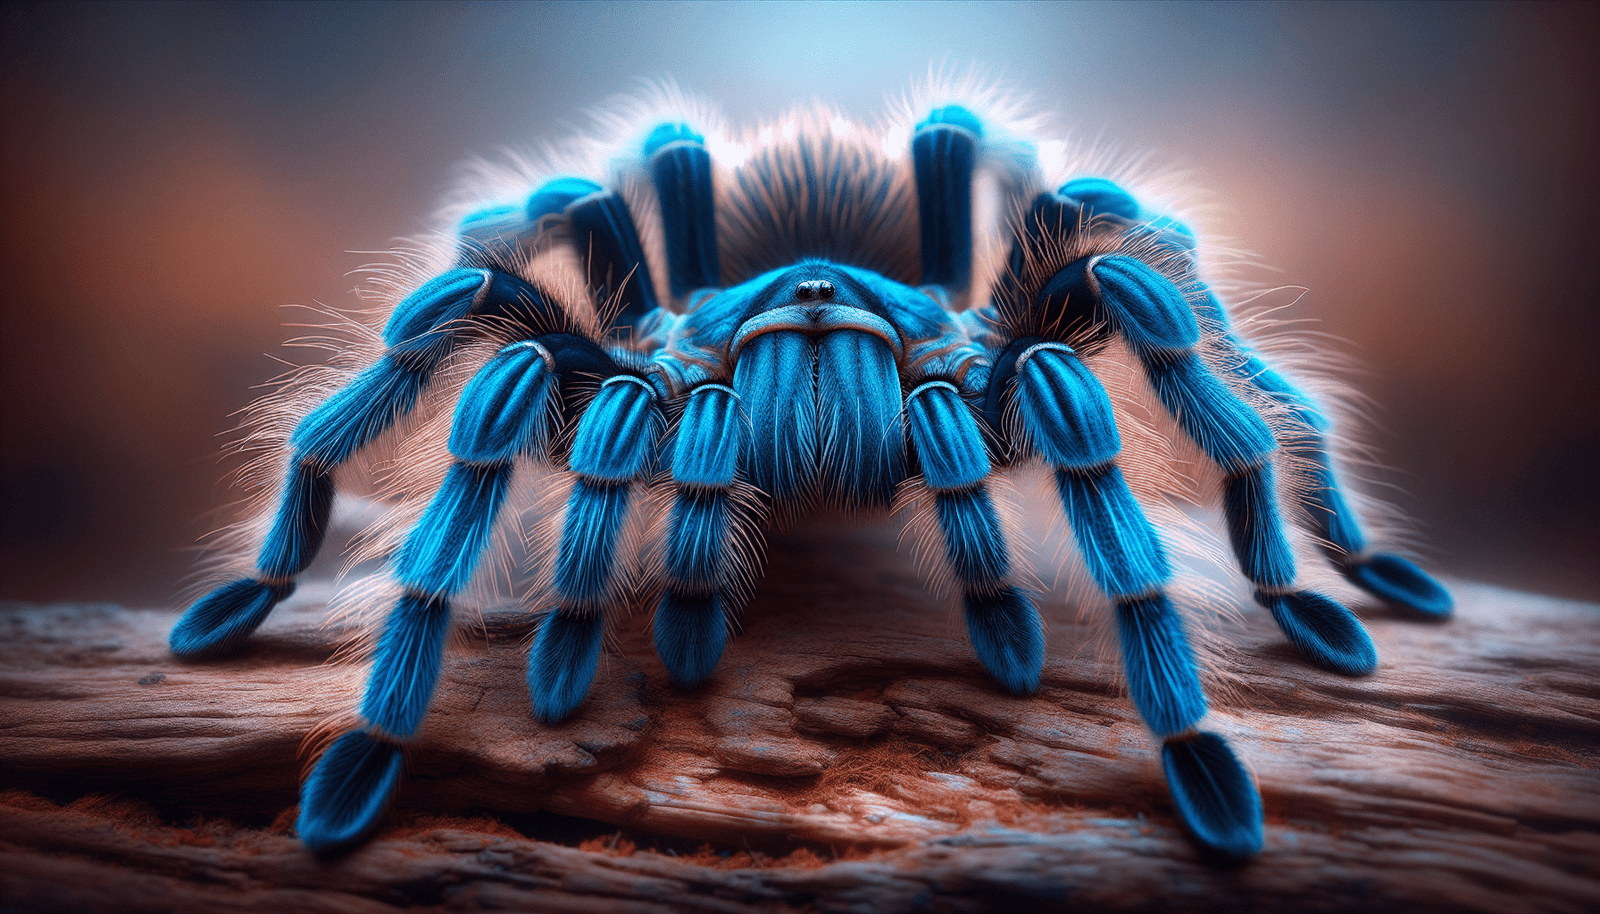 What Is The Lifespan And Growth Rate Of The Visually Striking Cobalt Blue Tarantula?